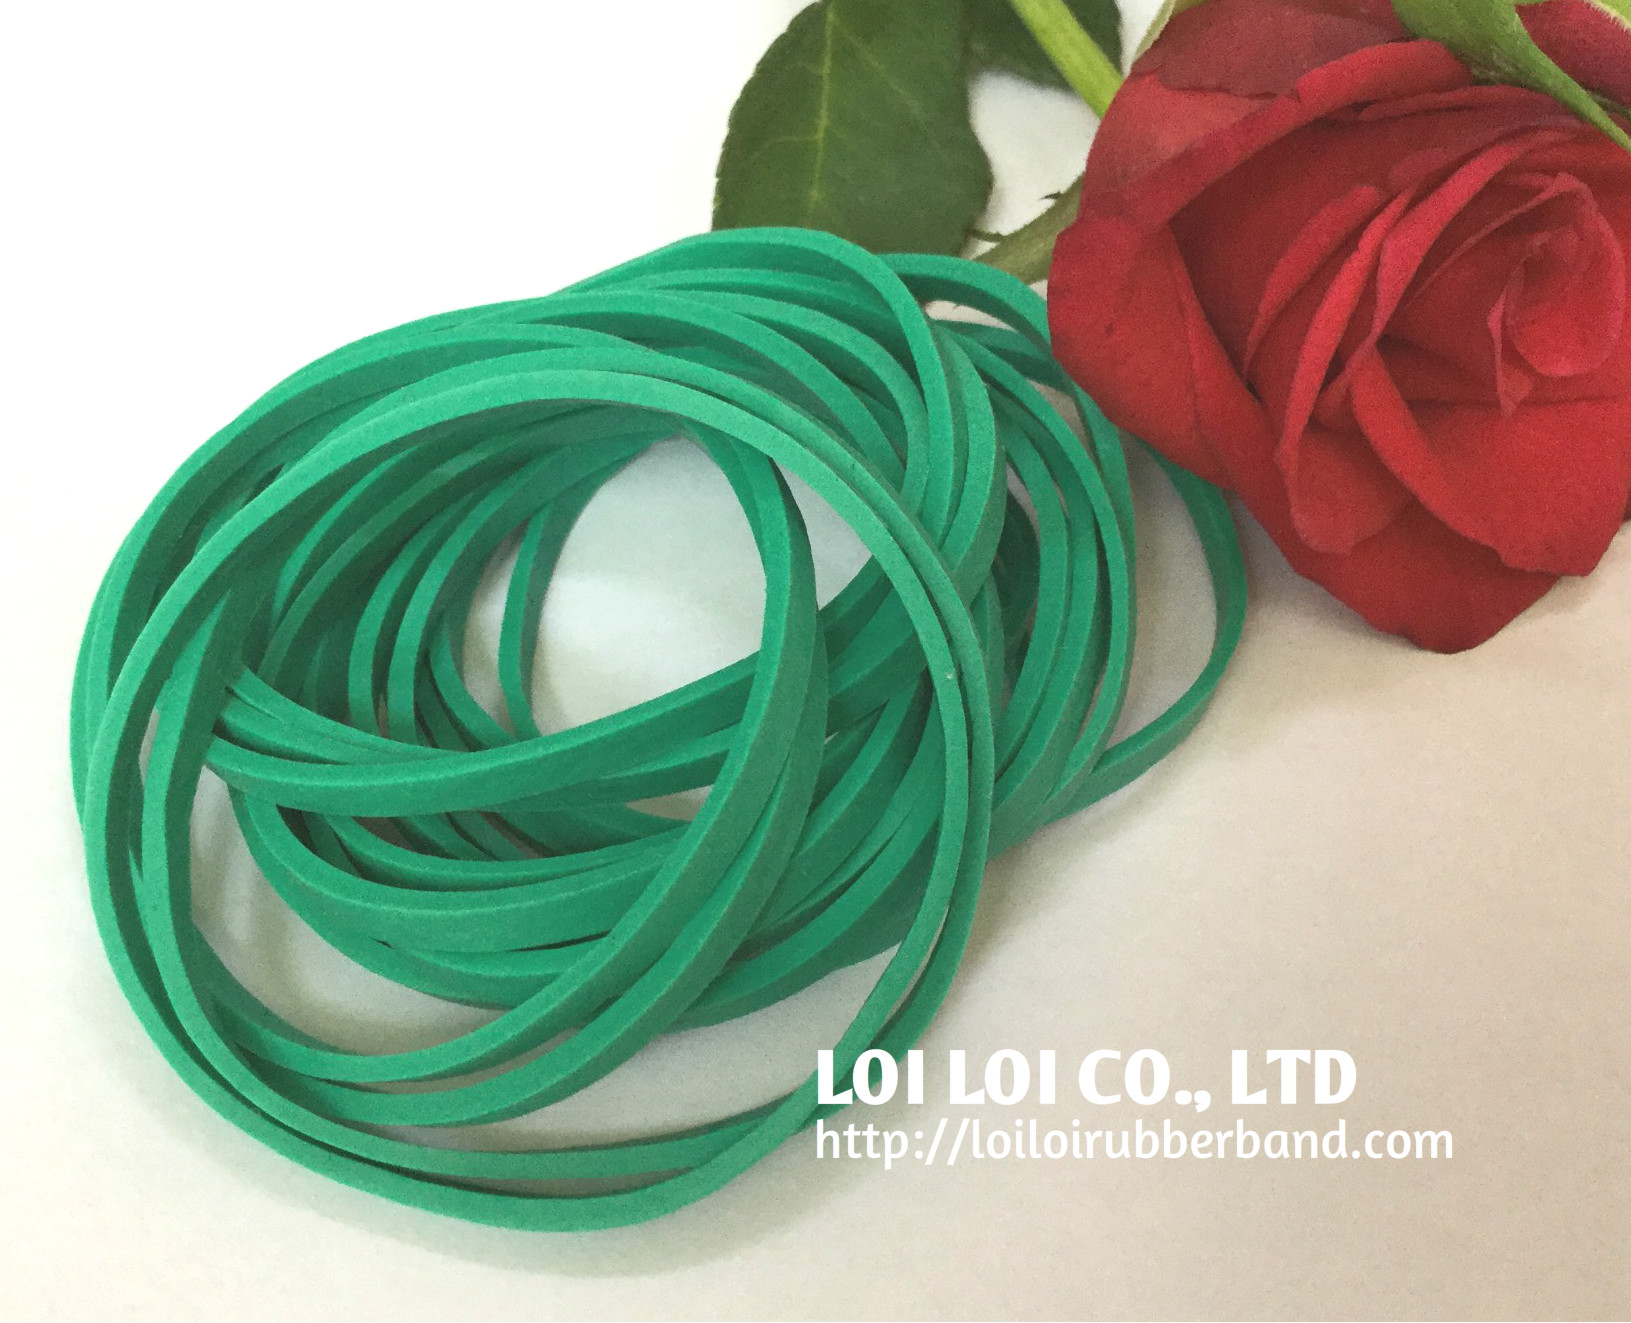 Elastic Rubber Bands multipurpose Large Green color Natural rubber band very strong and high quality from Vietnam manufacturer 